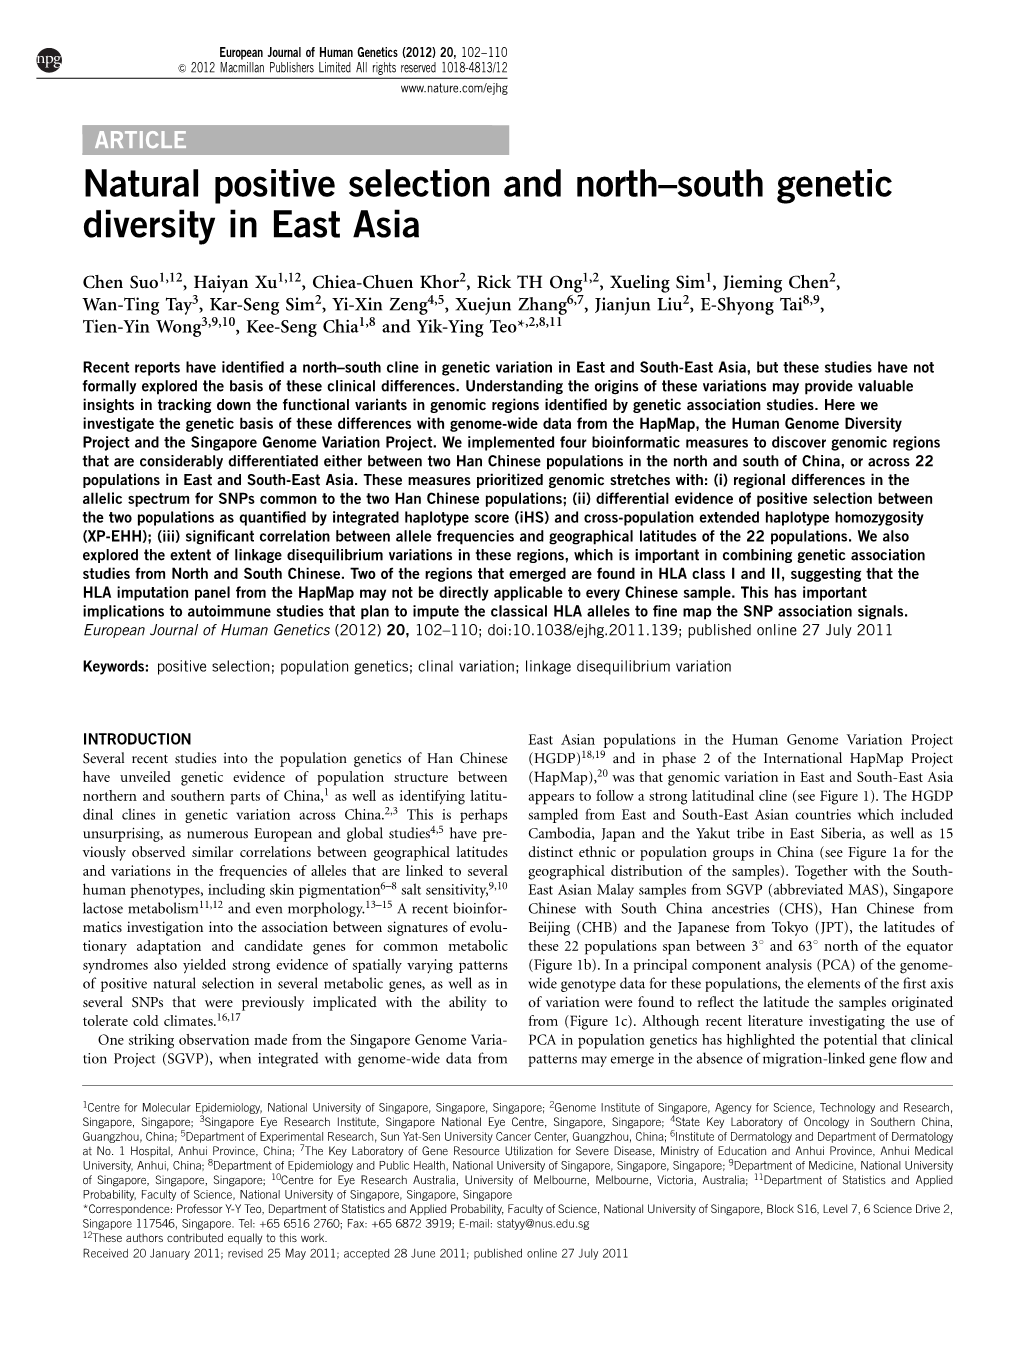 South Genetic Diversity in East Asia